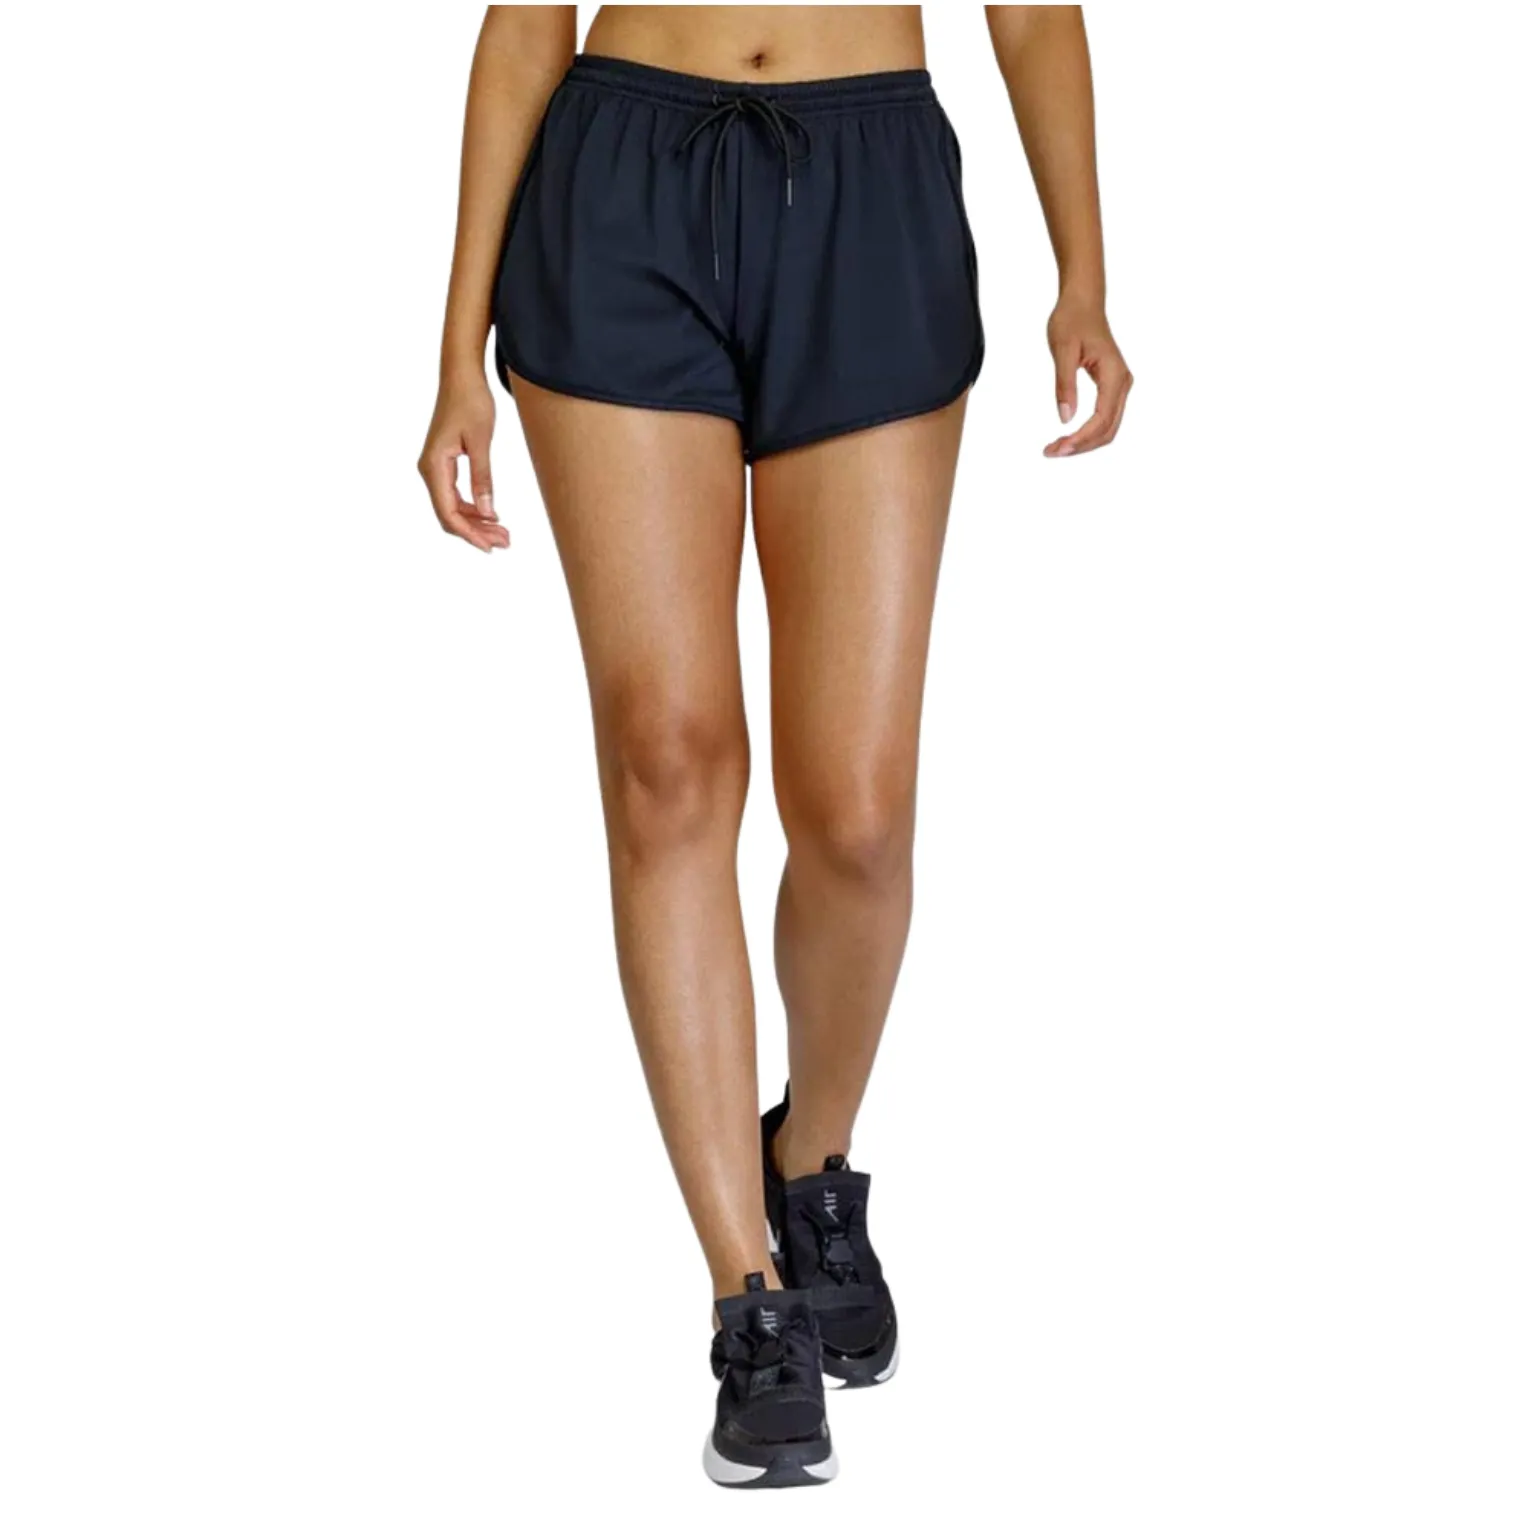 Tennis Shorts manufacturing with trendy design